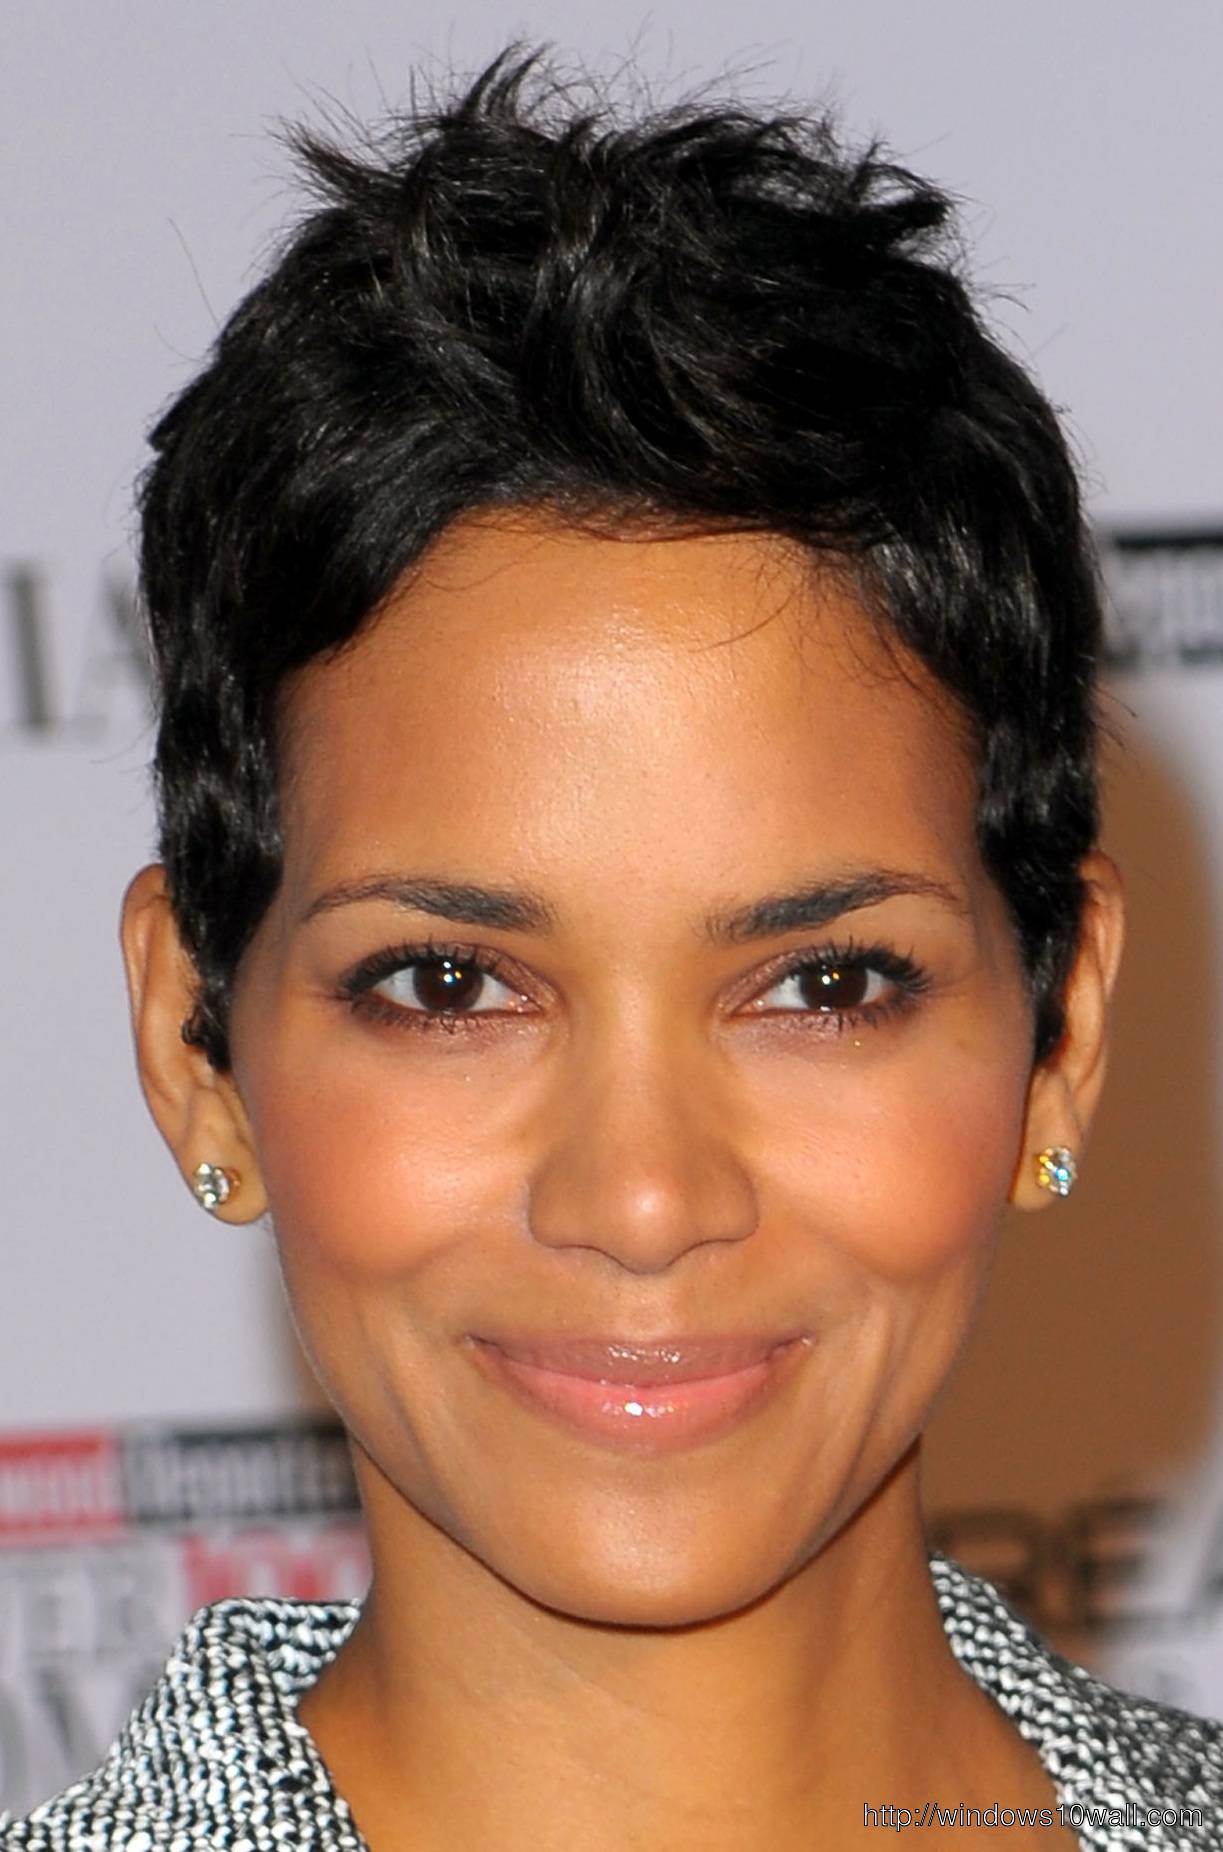 pixie-cuts-hairstyle-for-black-woman-background-wallpaper